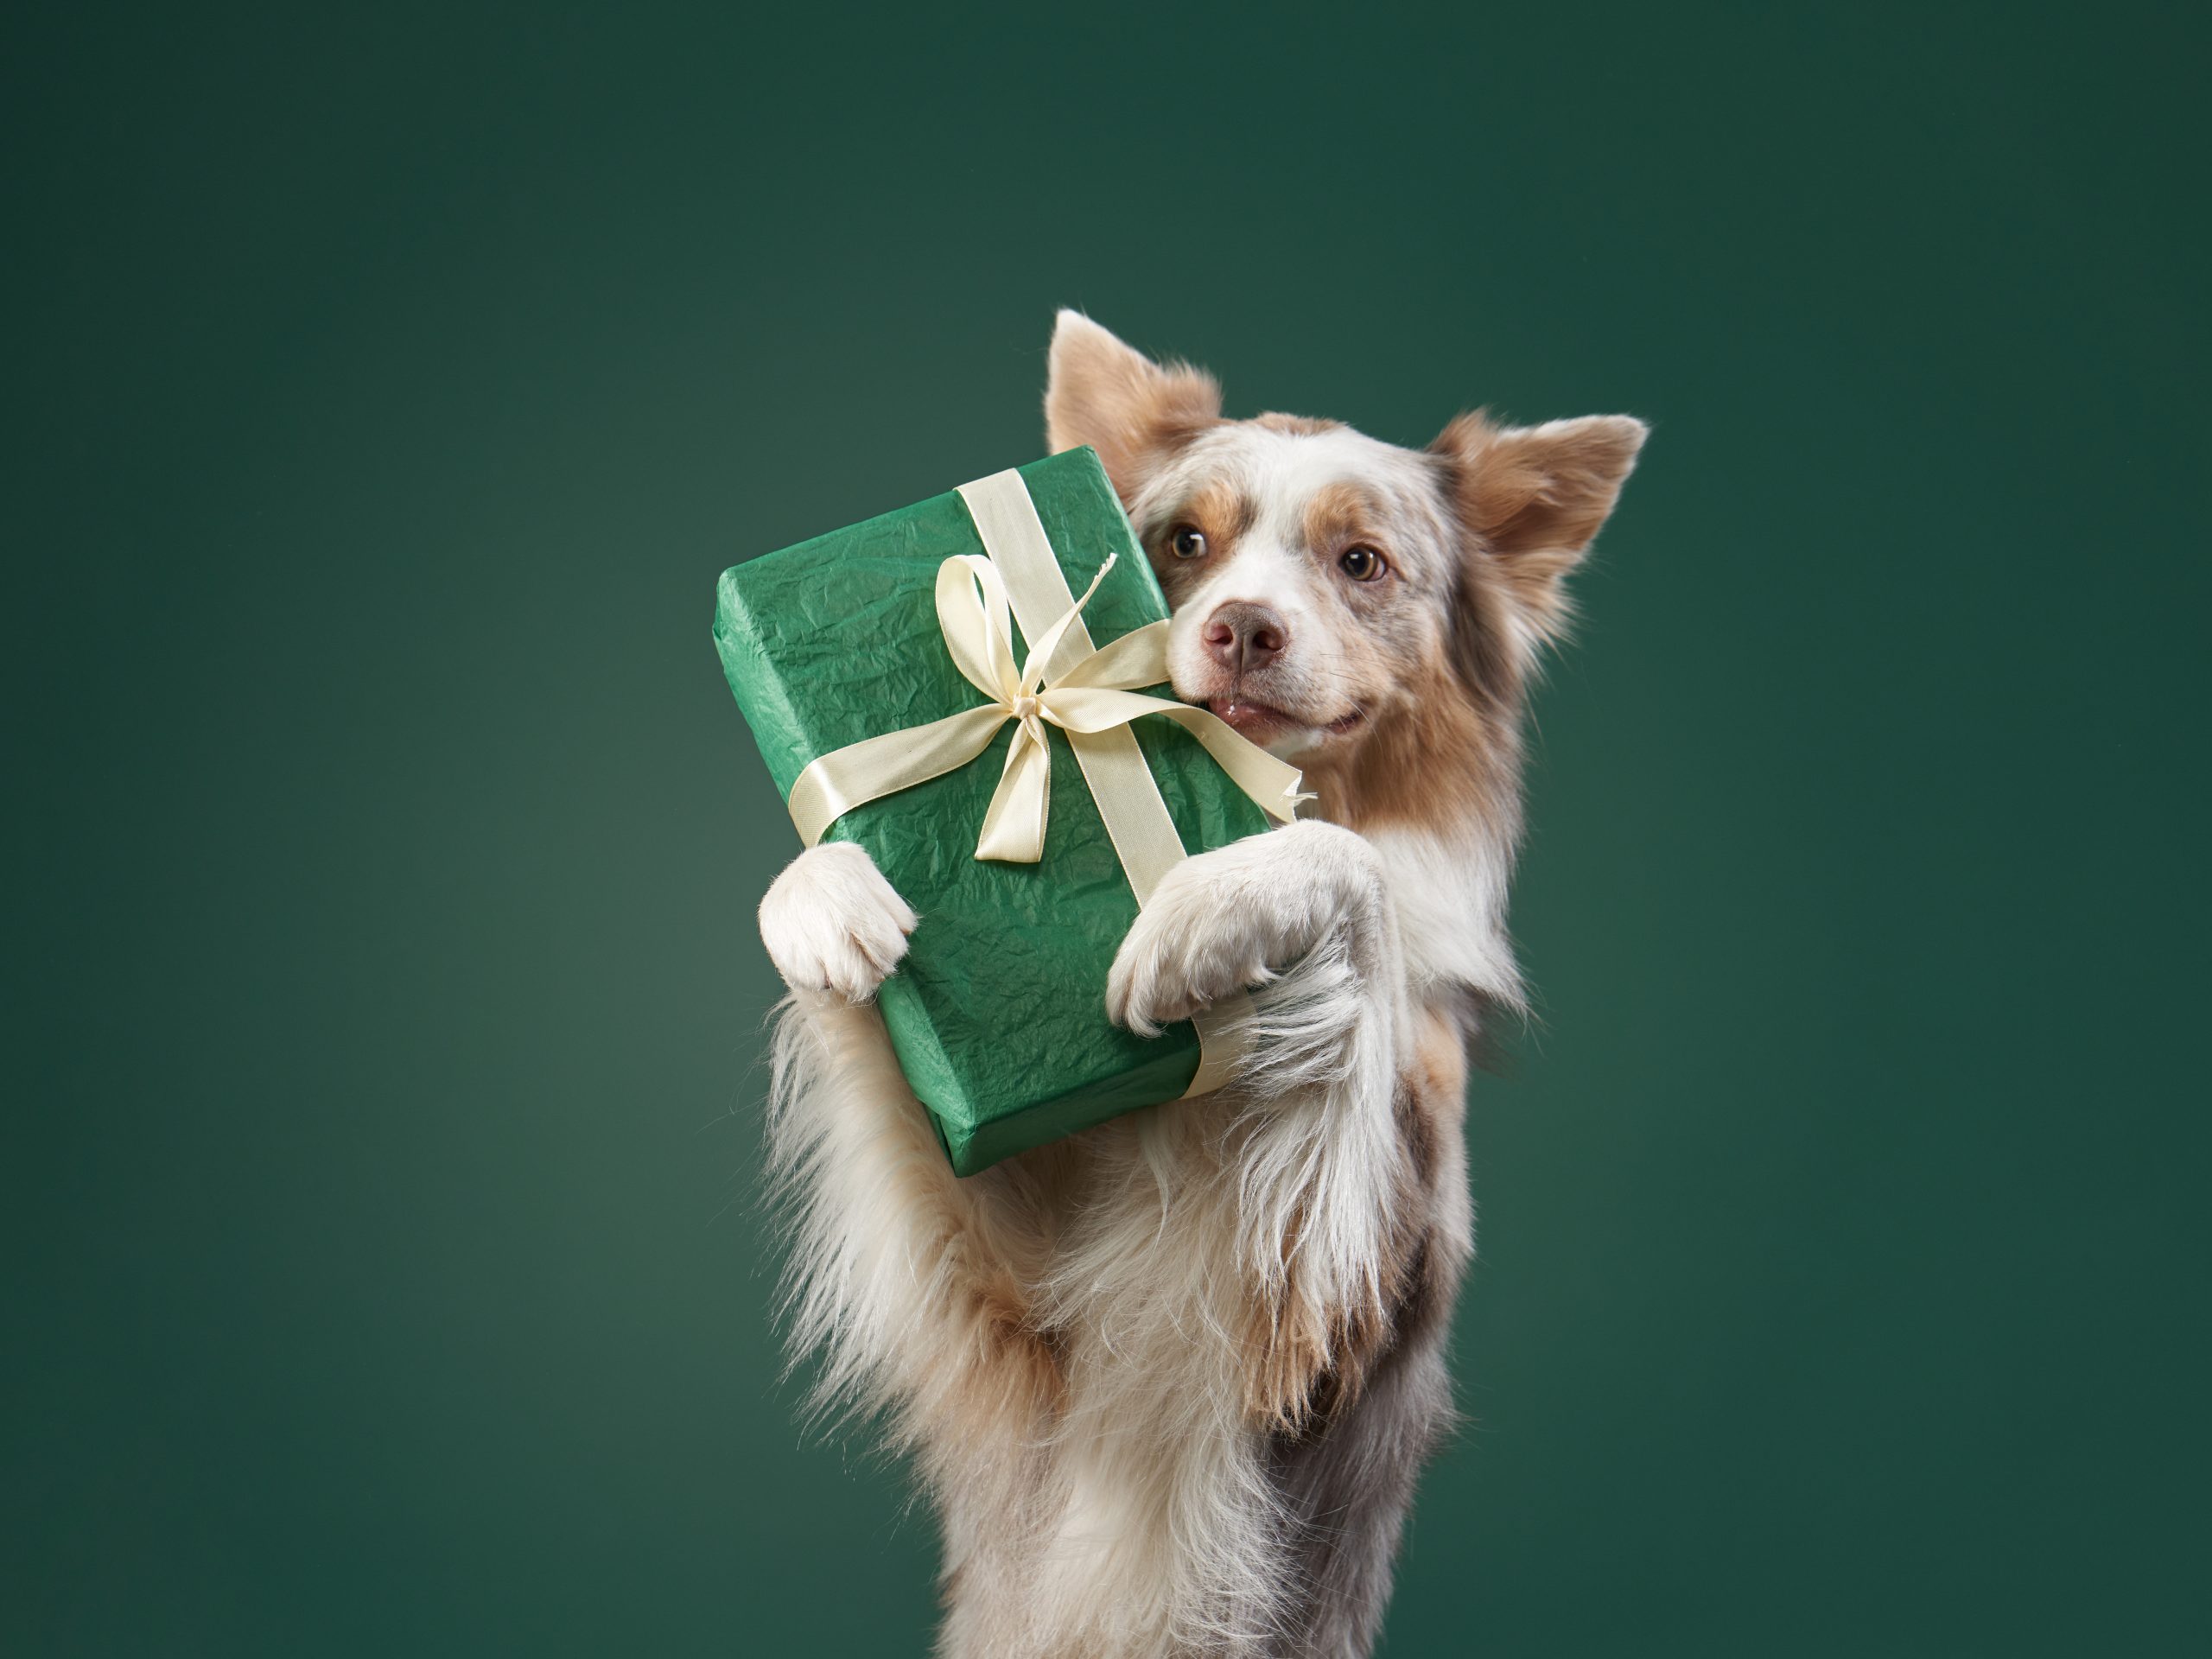 Happy dog is holding a gift. Border collie on a green background.